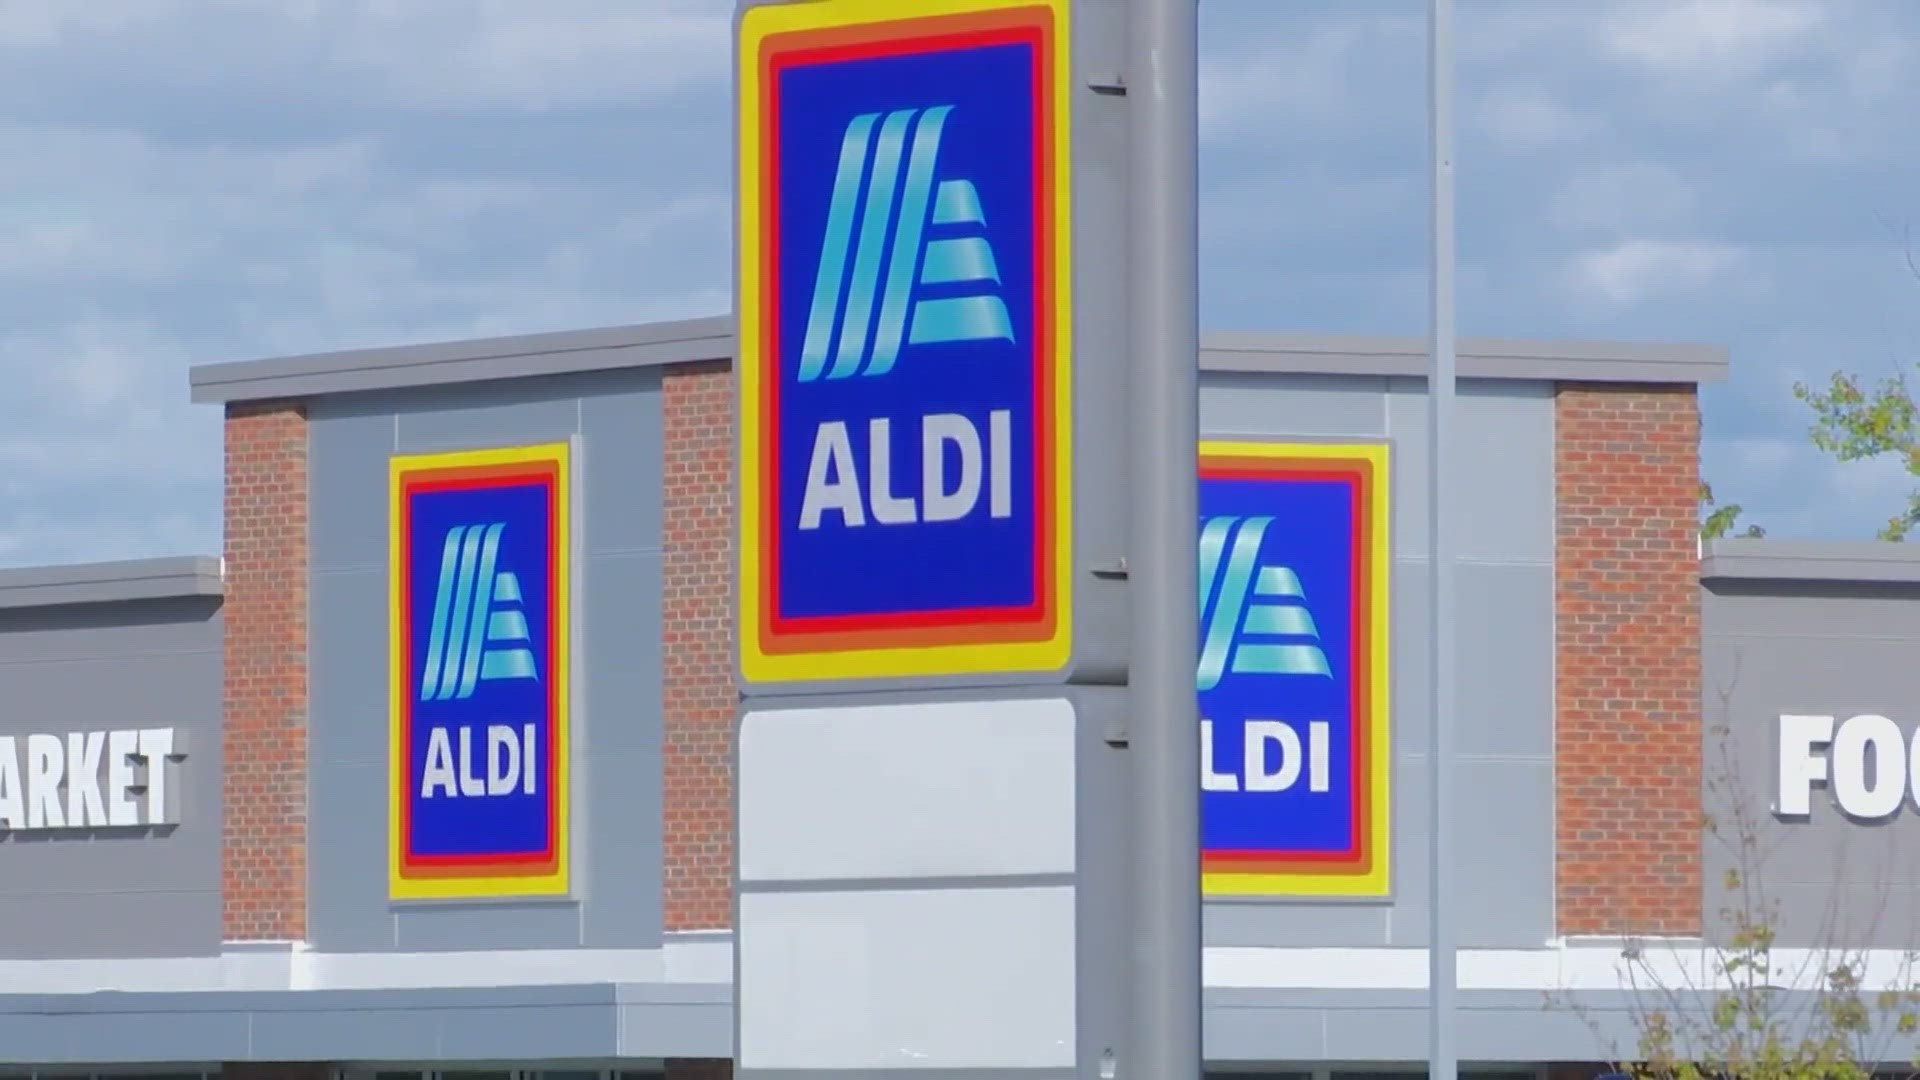 In addition to new stores, Aldi will convert a number of Winn-Dixie and Harveys Supermarket locations over the next several years.